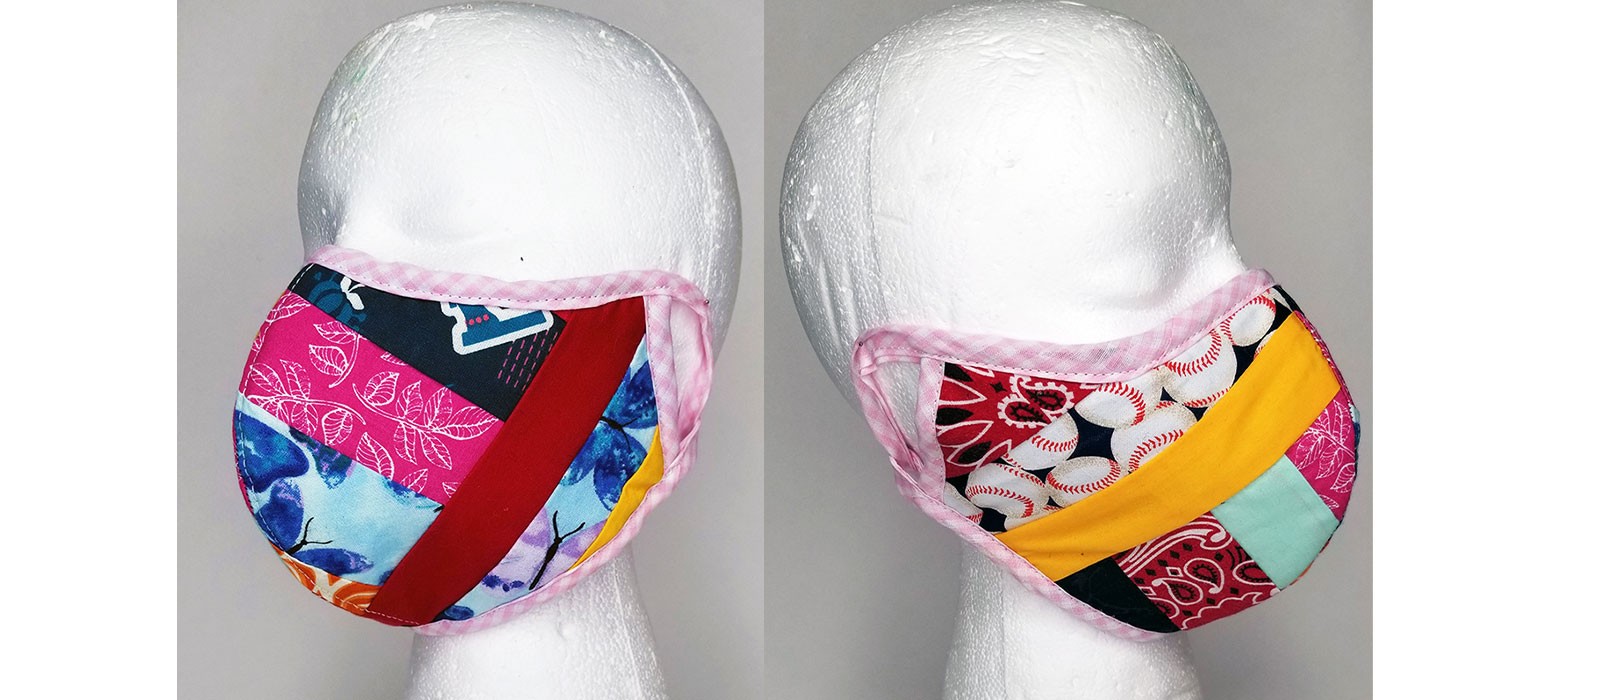 second mask with multi color patterns 